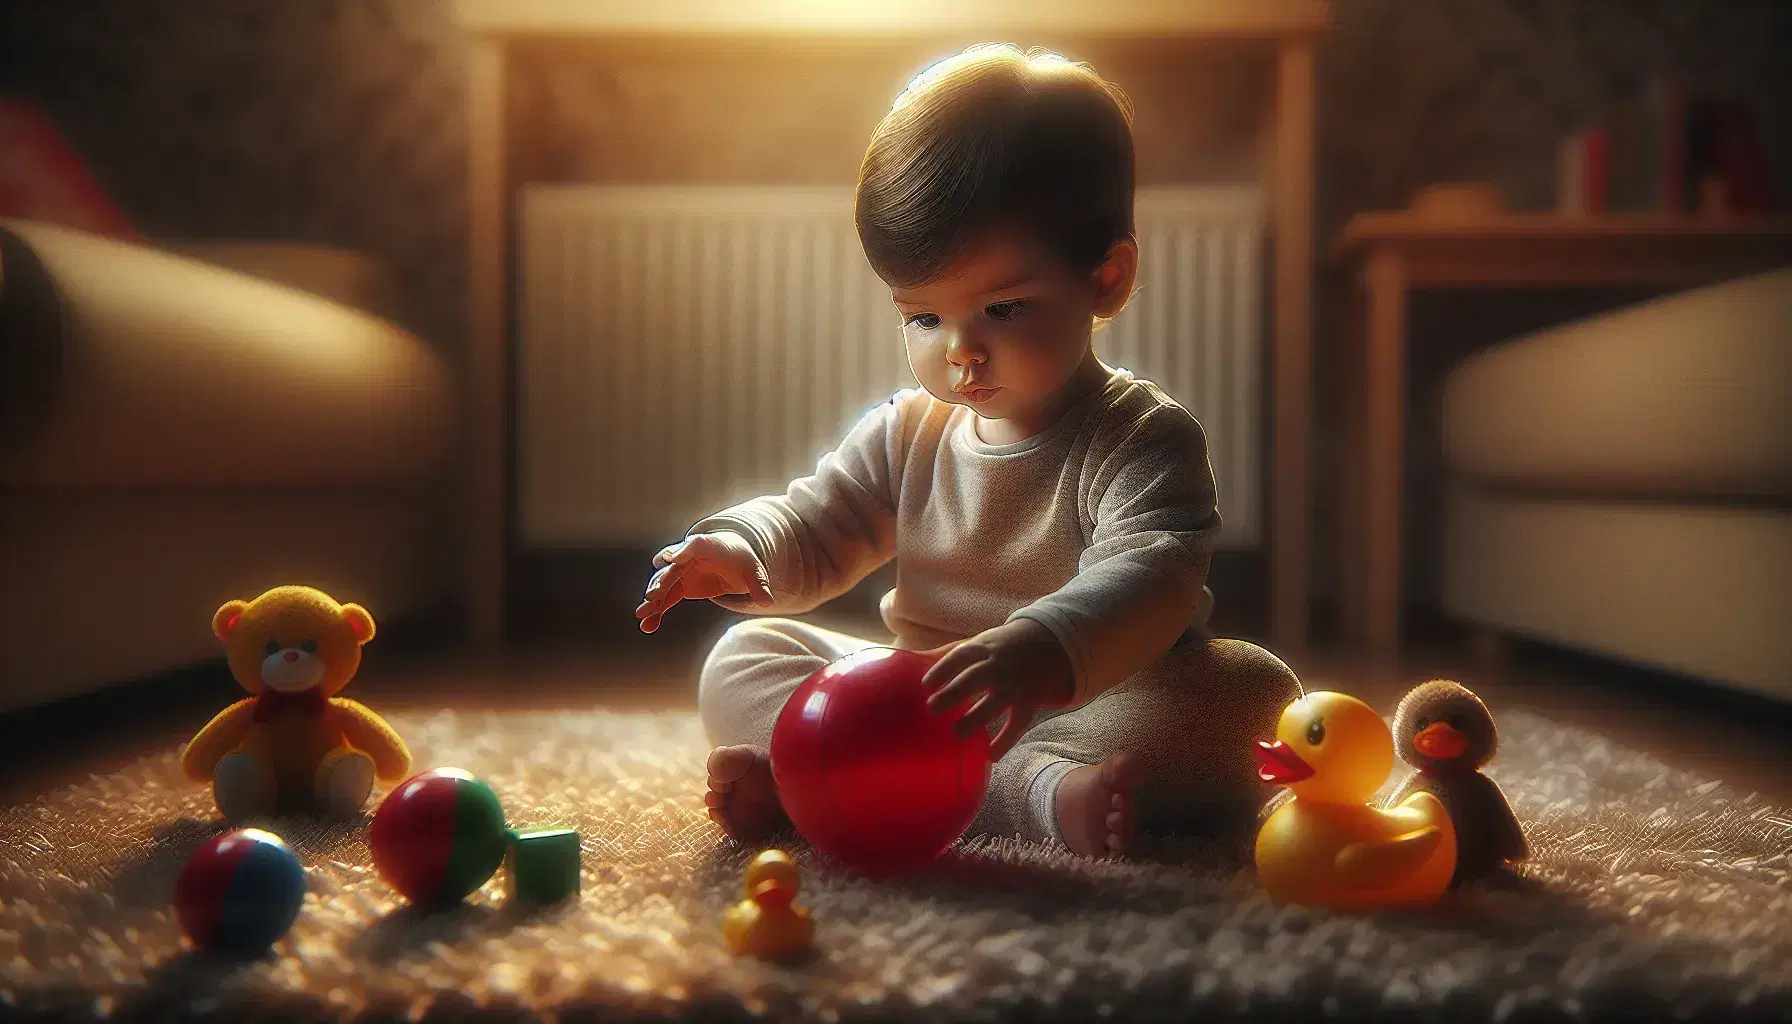 Toddler on textured rug reaching for red ball and yellow duck toy in a warm, inviting playroom setting.